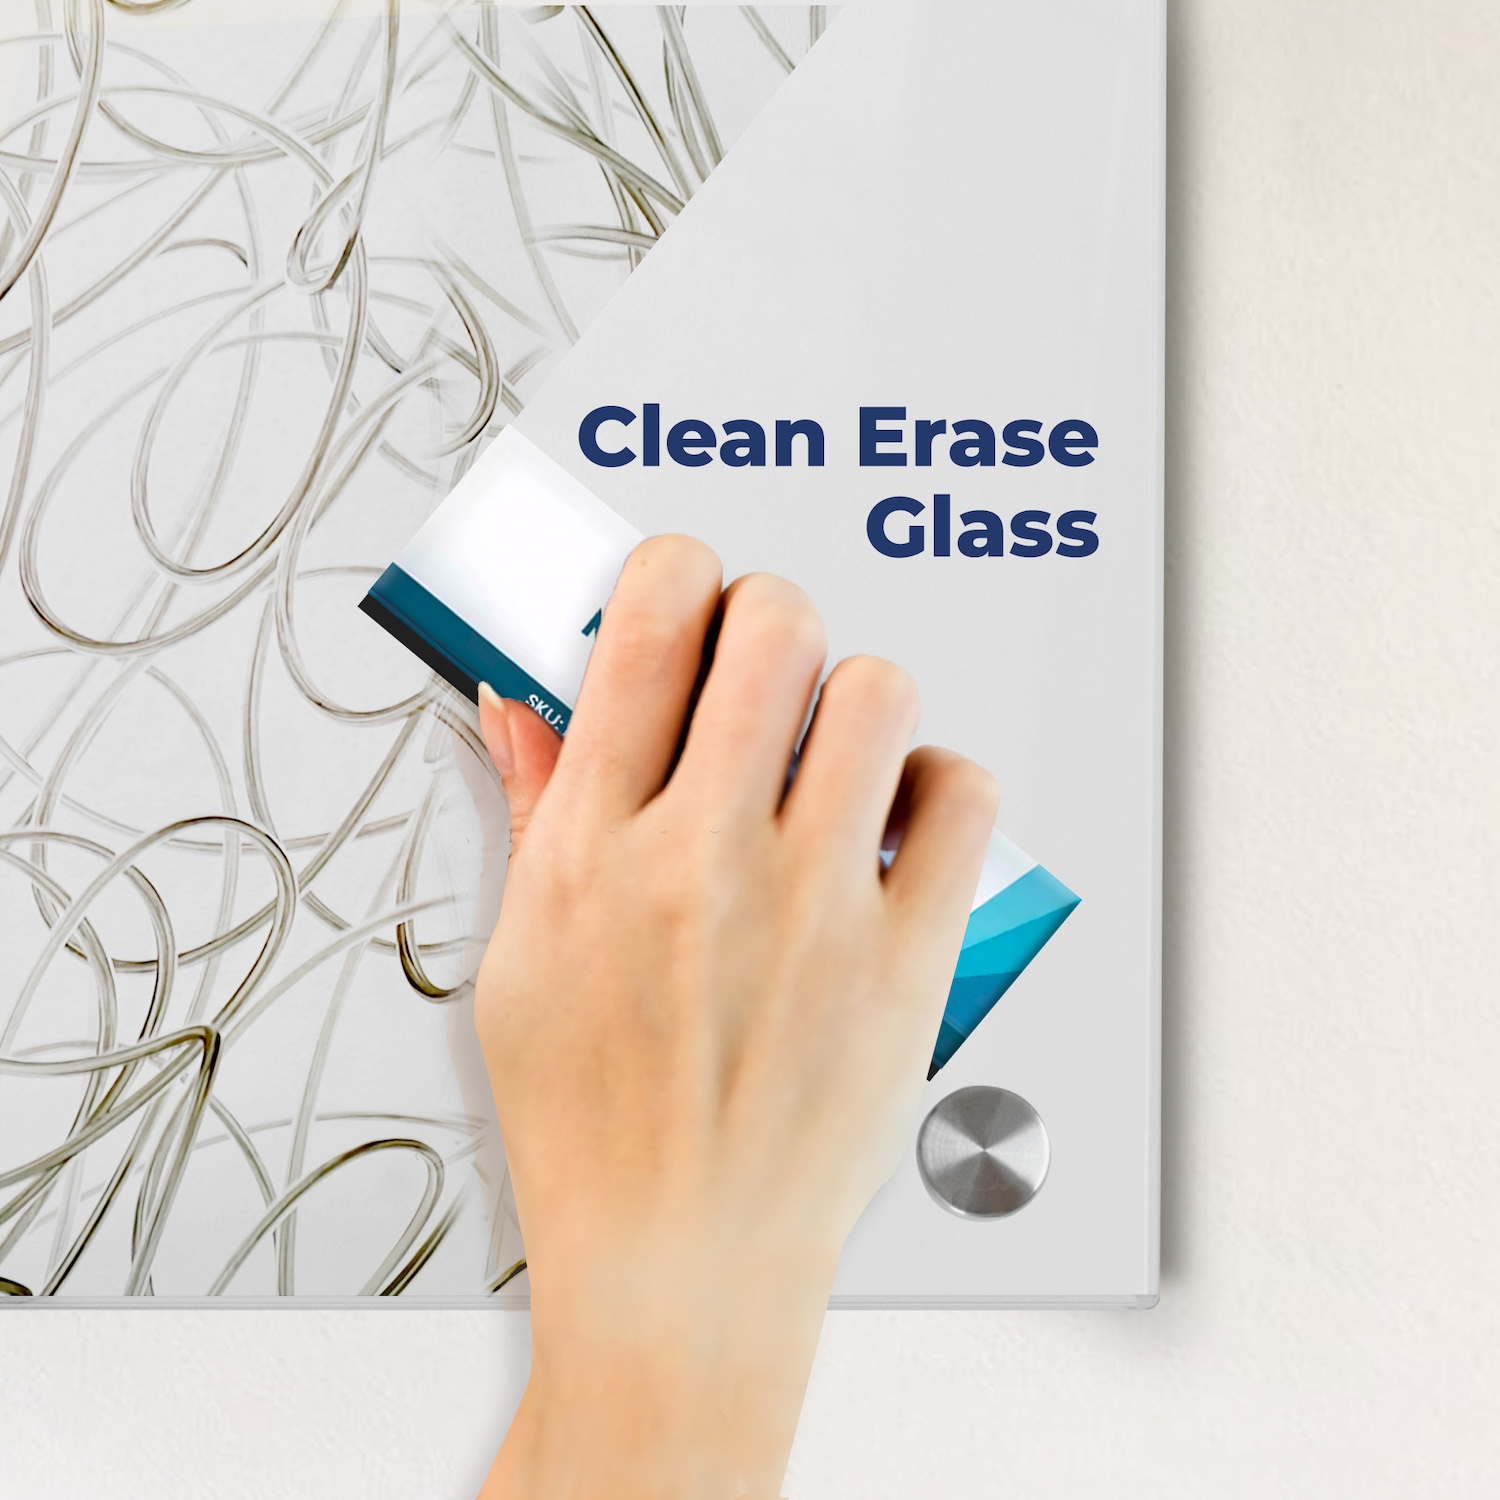 Magnetic Glass Dry Erase Board - 24 x 36- Light Green